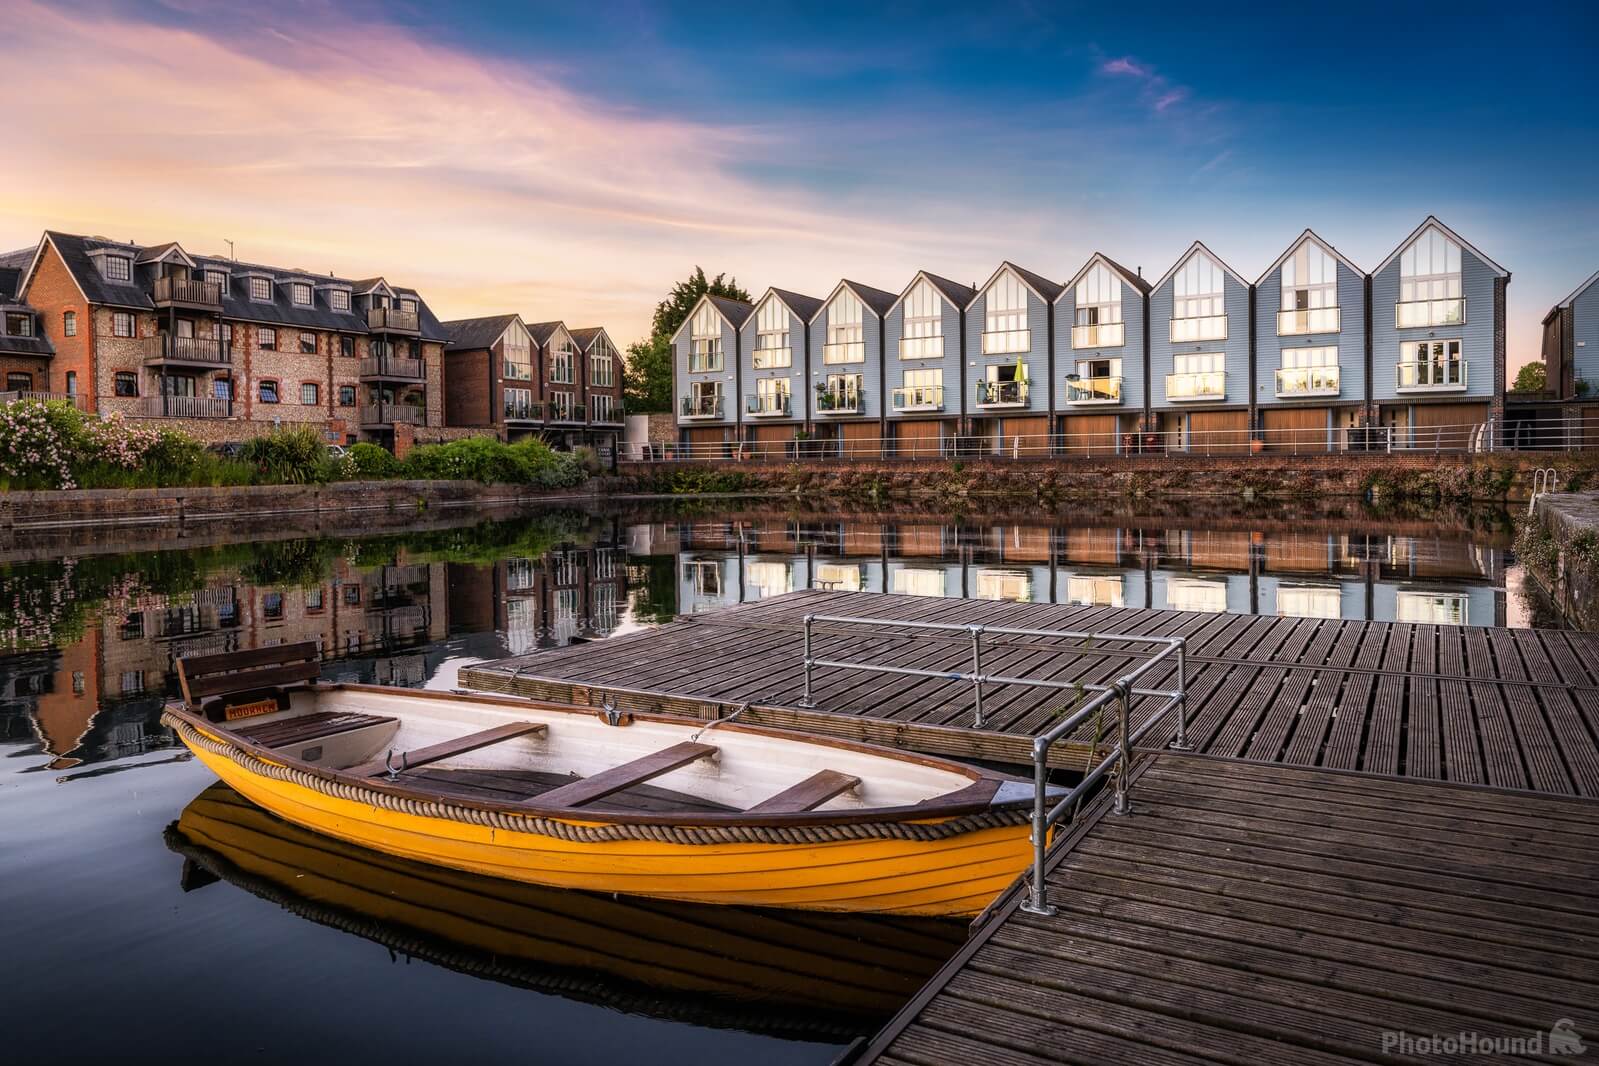 Image of Chichester Canal Basin by Jakub Bors